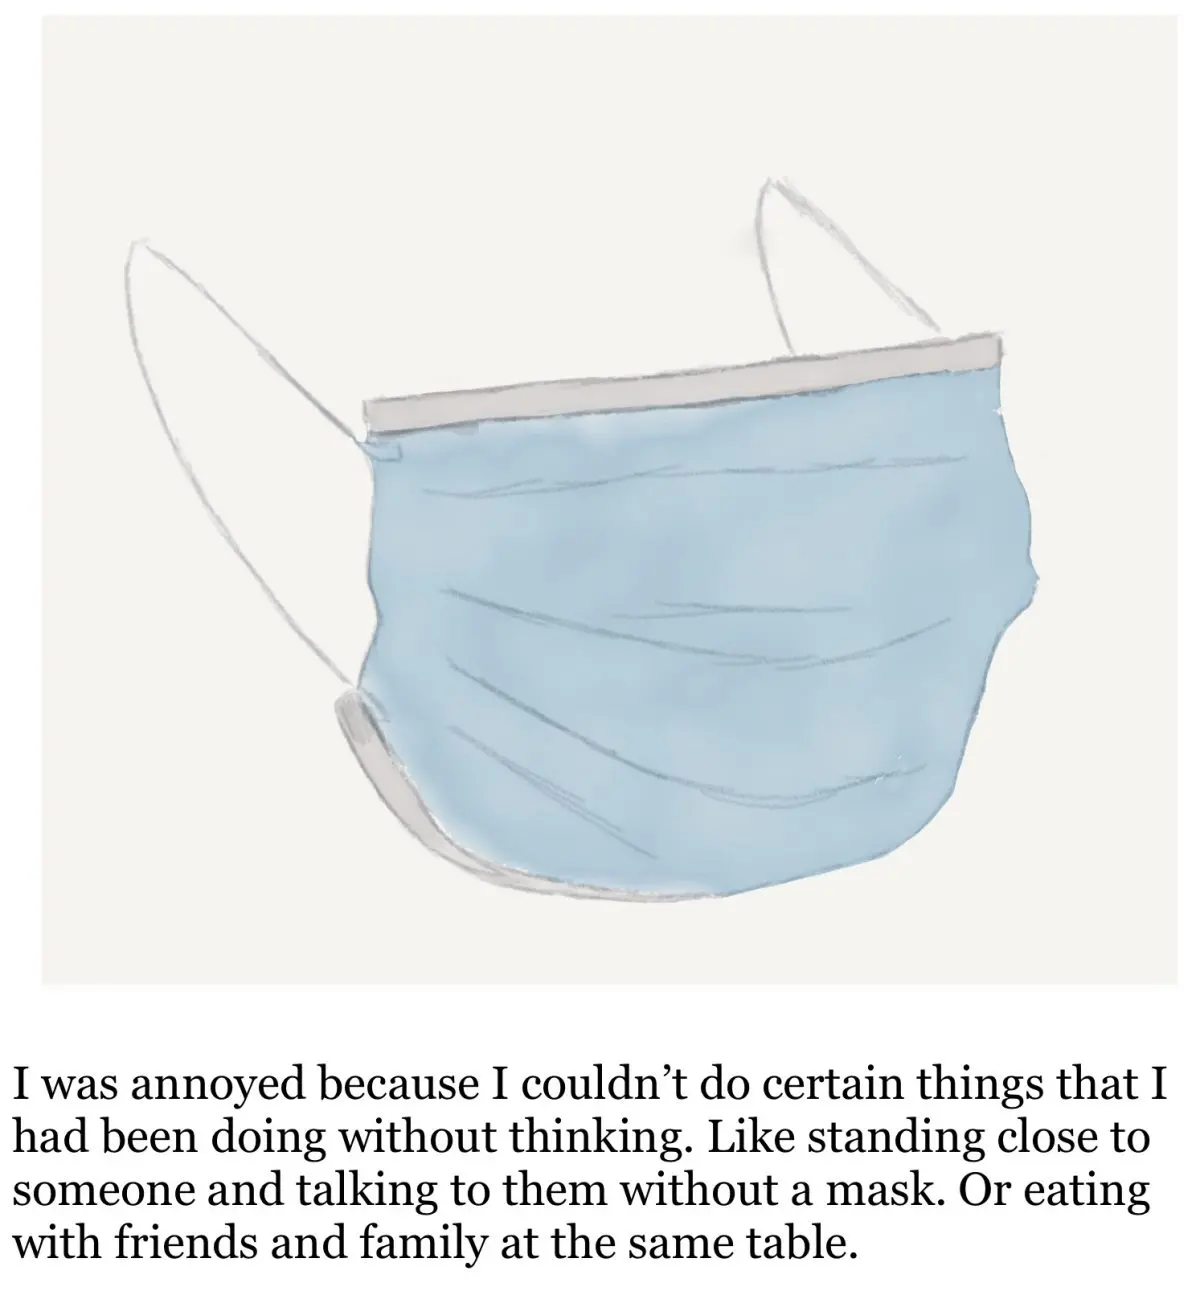 Drawing of blue medical mask. Under drawing the text reads "I was annoyed because I couldn't do certain things that I had been doing without thinking. Like standing close to someone and talking to them without a mask. Or eating with friends and family at the same table."